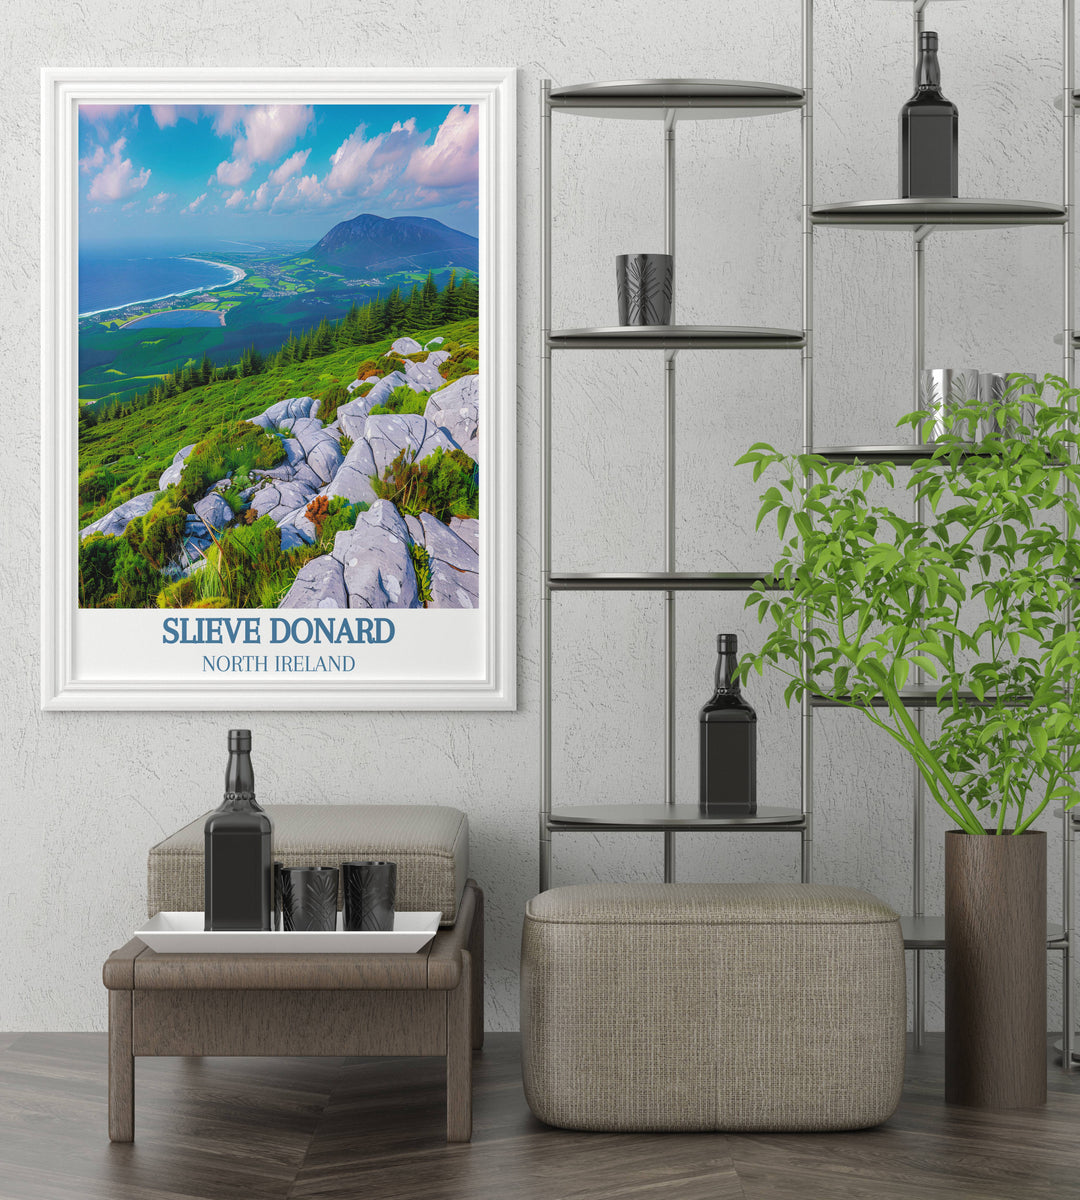 Retro travel posters featuring Slieve Donard bring a touch of vintage charm to your walls. The artwork captures the rugged beauty and historical significance of the Mourne Mountains, making it a perfect piece for those who appreciate classic travel art.